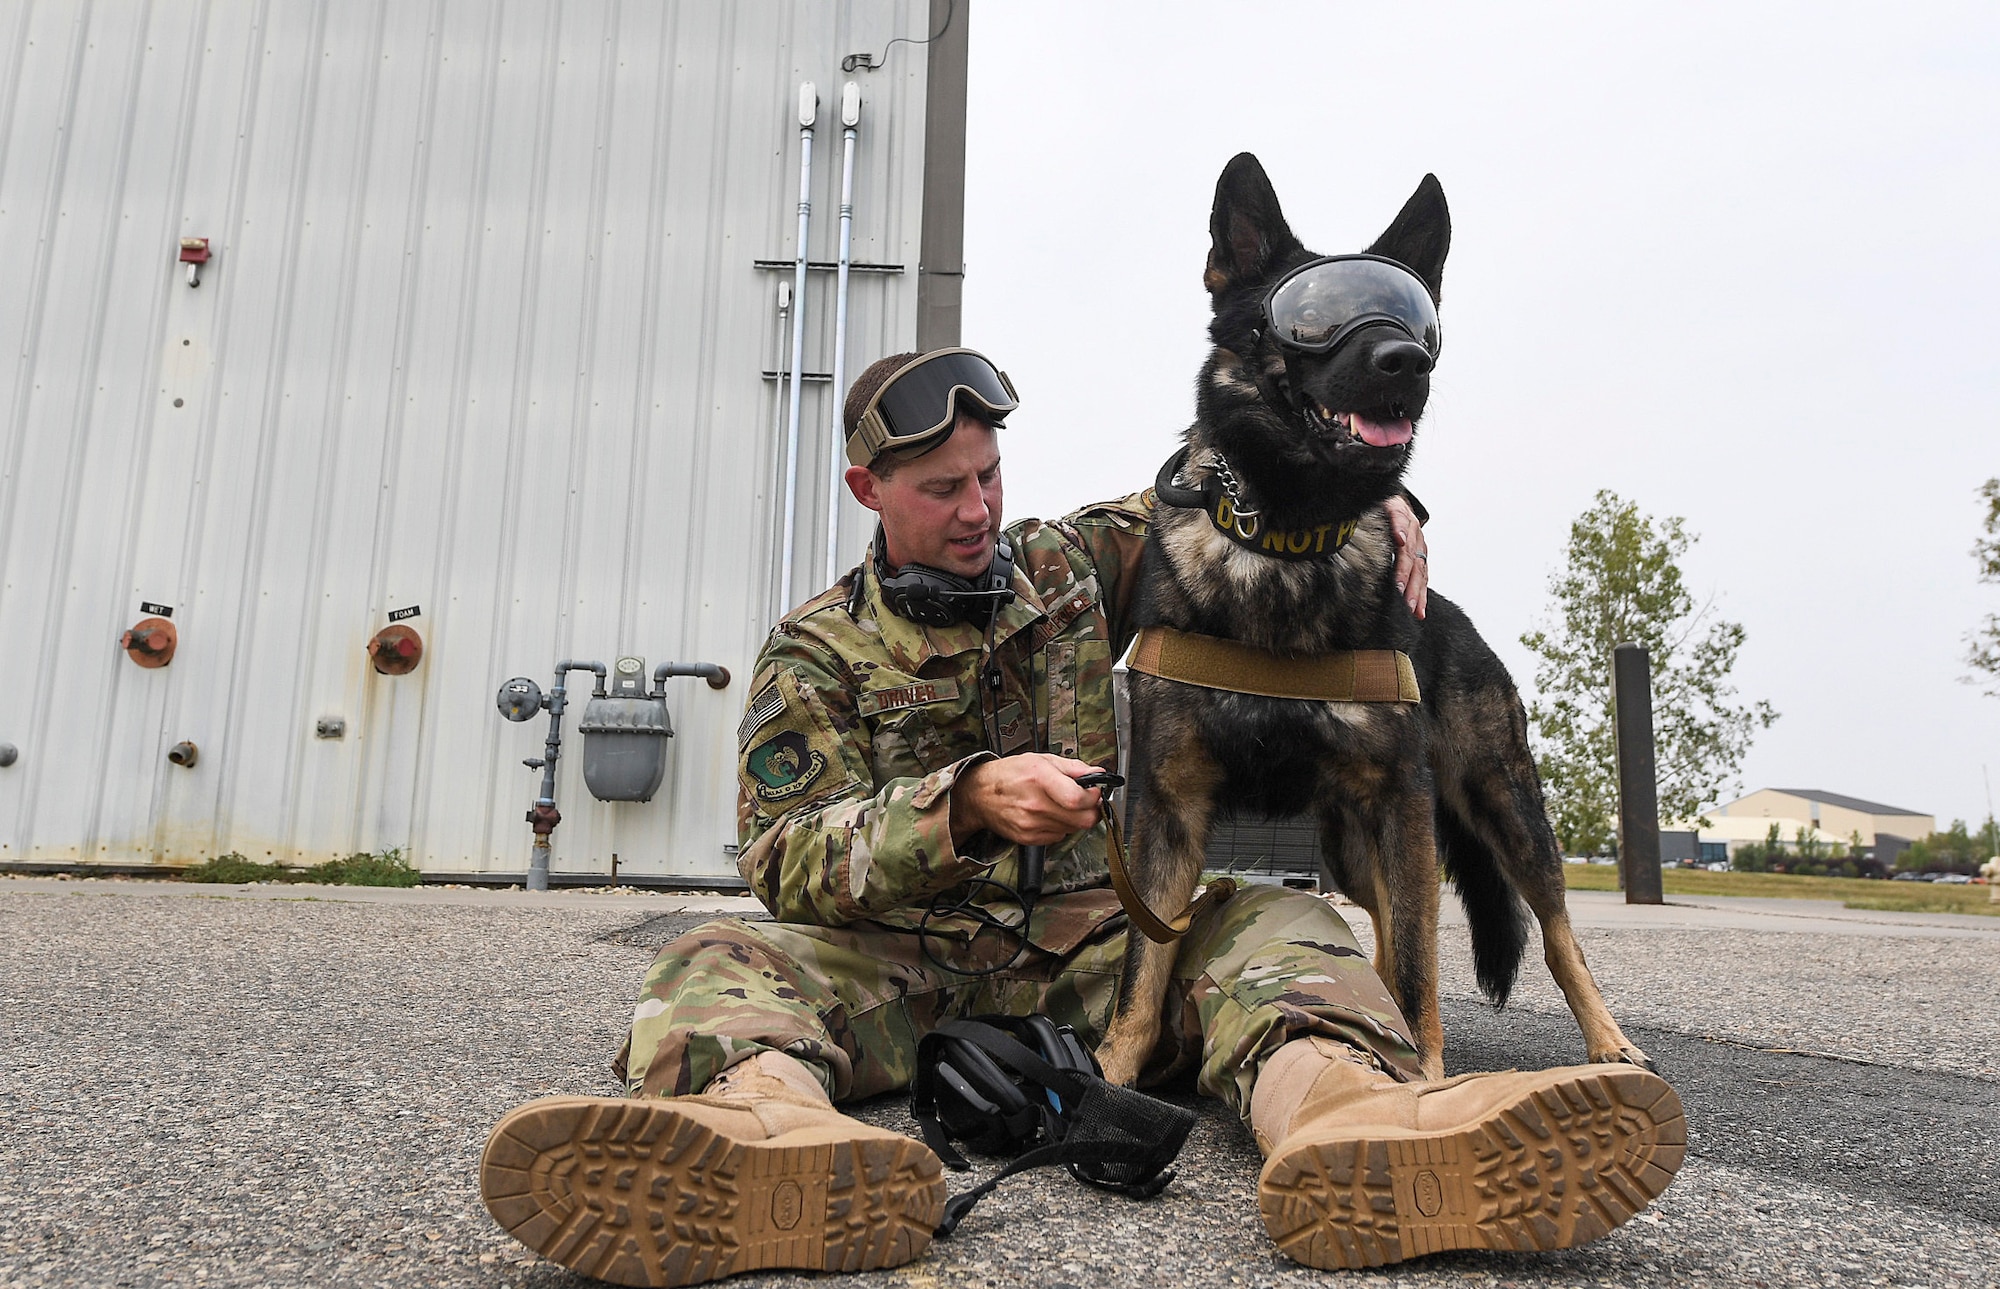 Staff Sgt. Timothy Driver, 5th Security Forces Squadron military working dog handler, adjusts safety equipment for Deny, 5th SFS MWD, during flight familiarization training at Minot Air Force Base, N.D., Aug. 23, 2018. This was the first time the K-9 unit has flown with the 54th Helicopter Squadron. (U.S. Air Force photo by Senior Airman Jonathan McElderry)